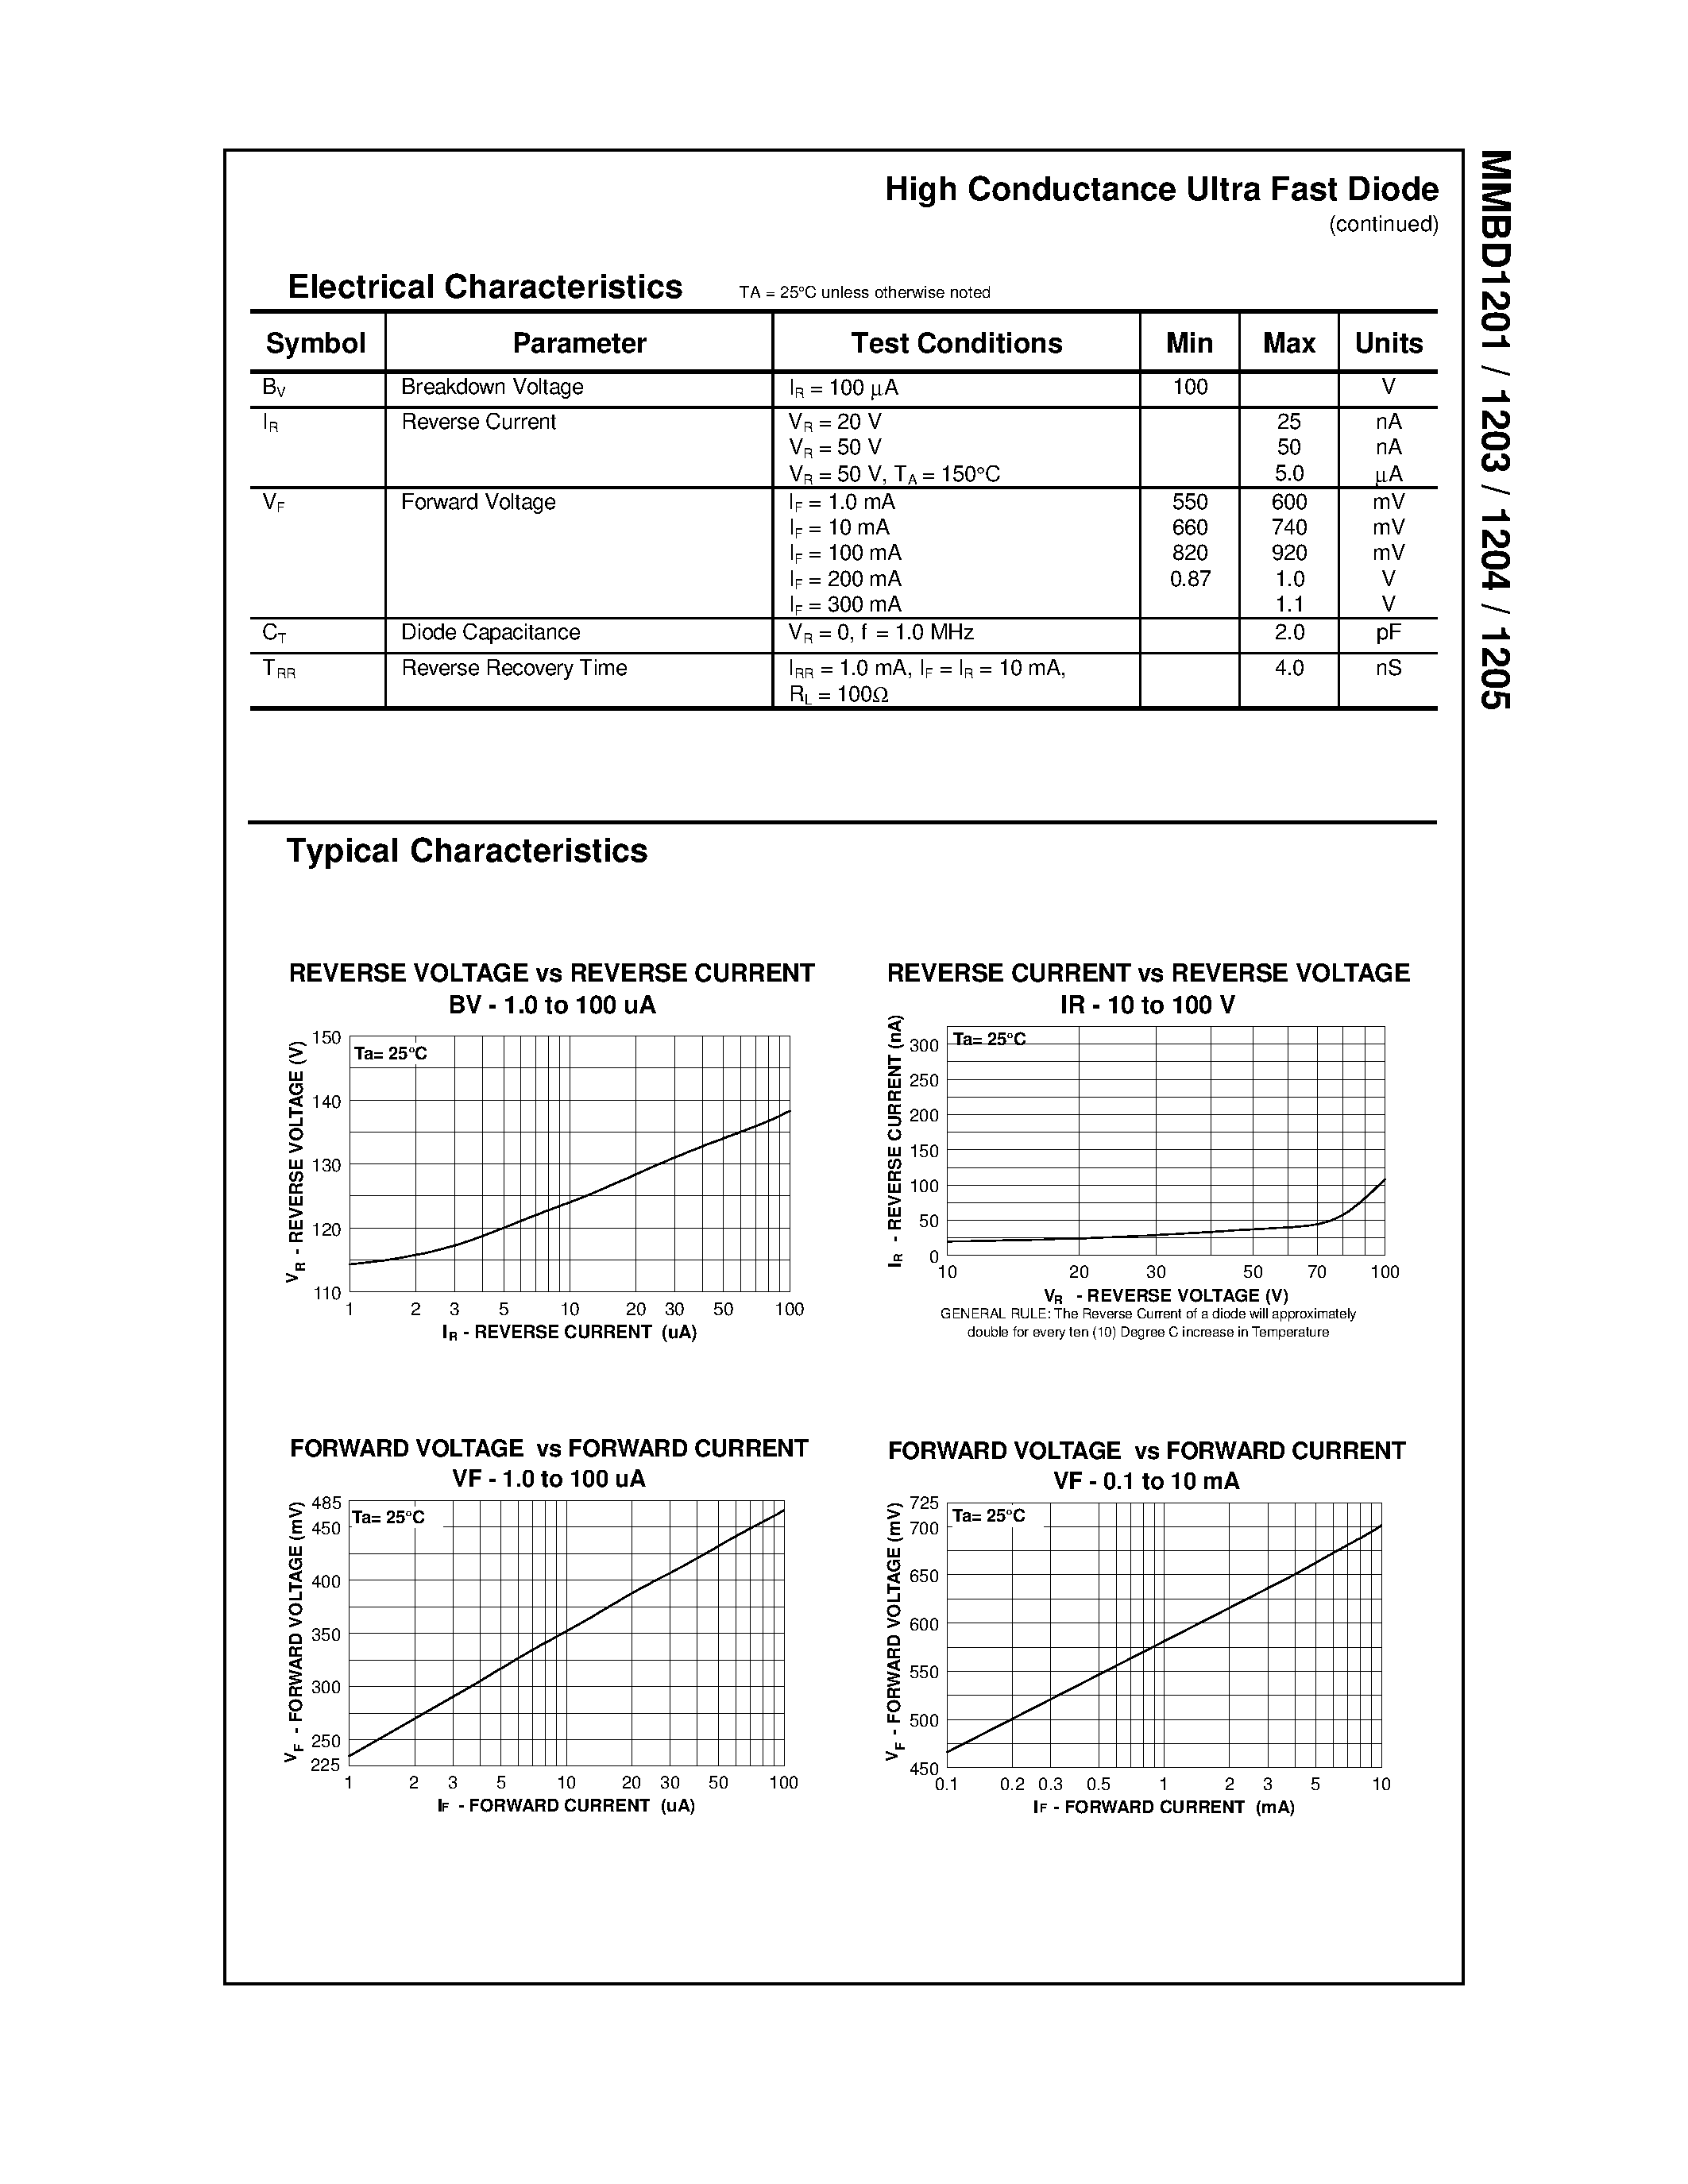 Datasheet MMBD1201 - High Conductance Ultra Fast Diode page 2